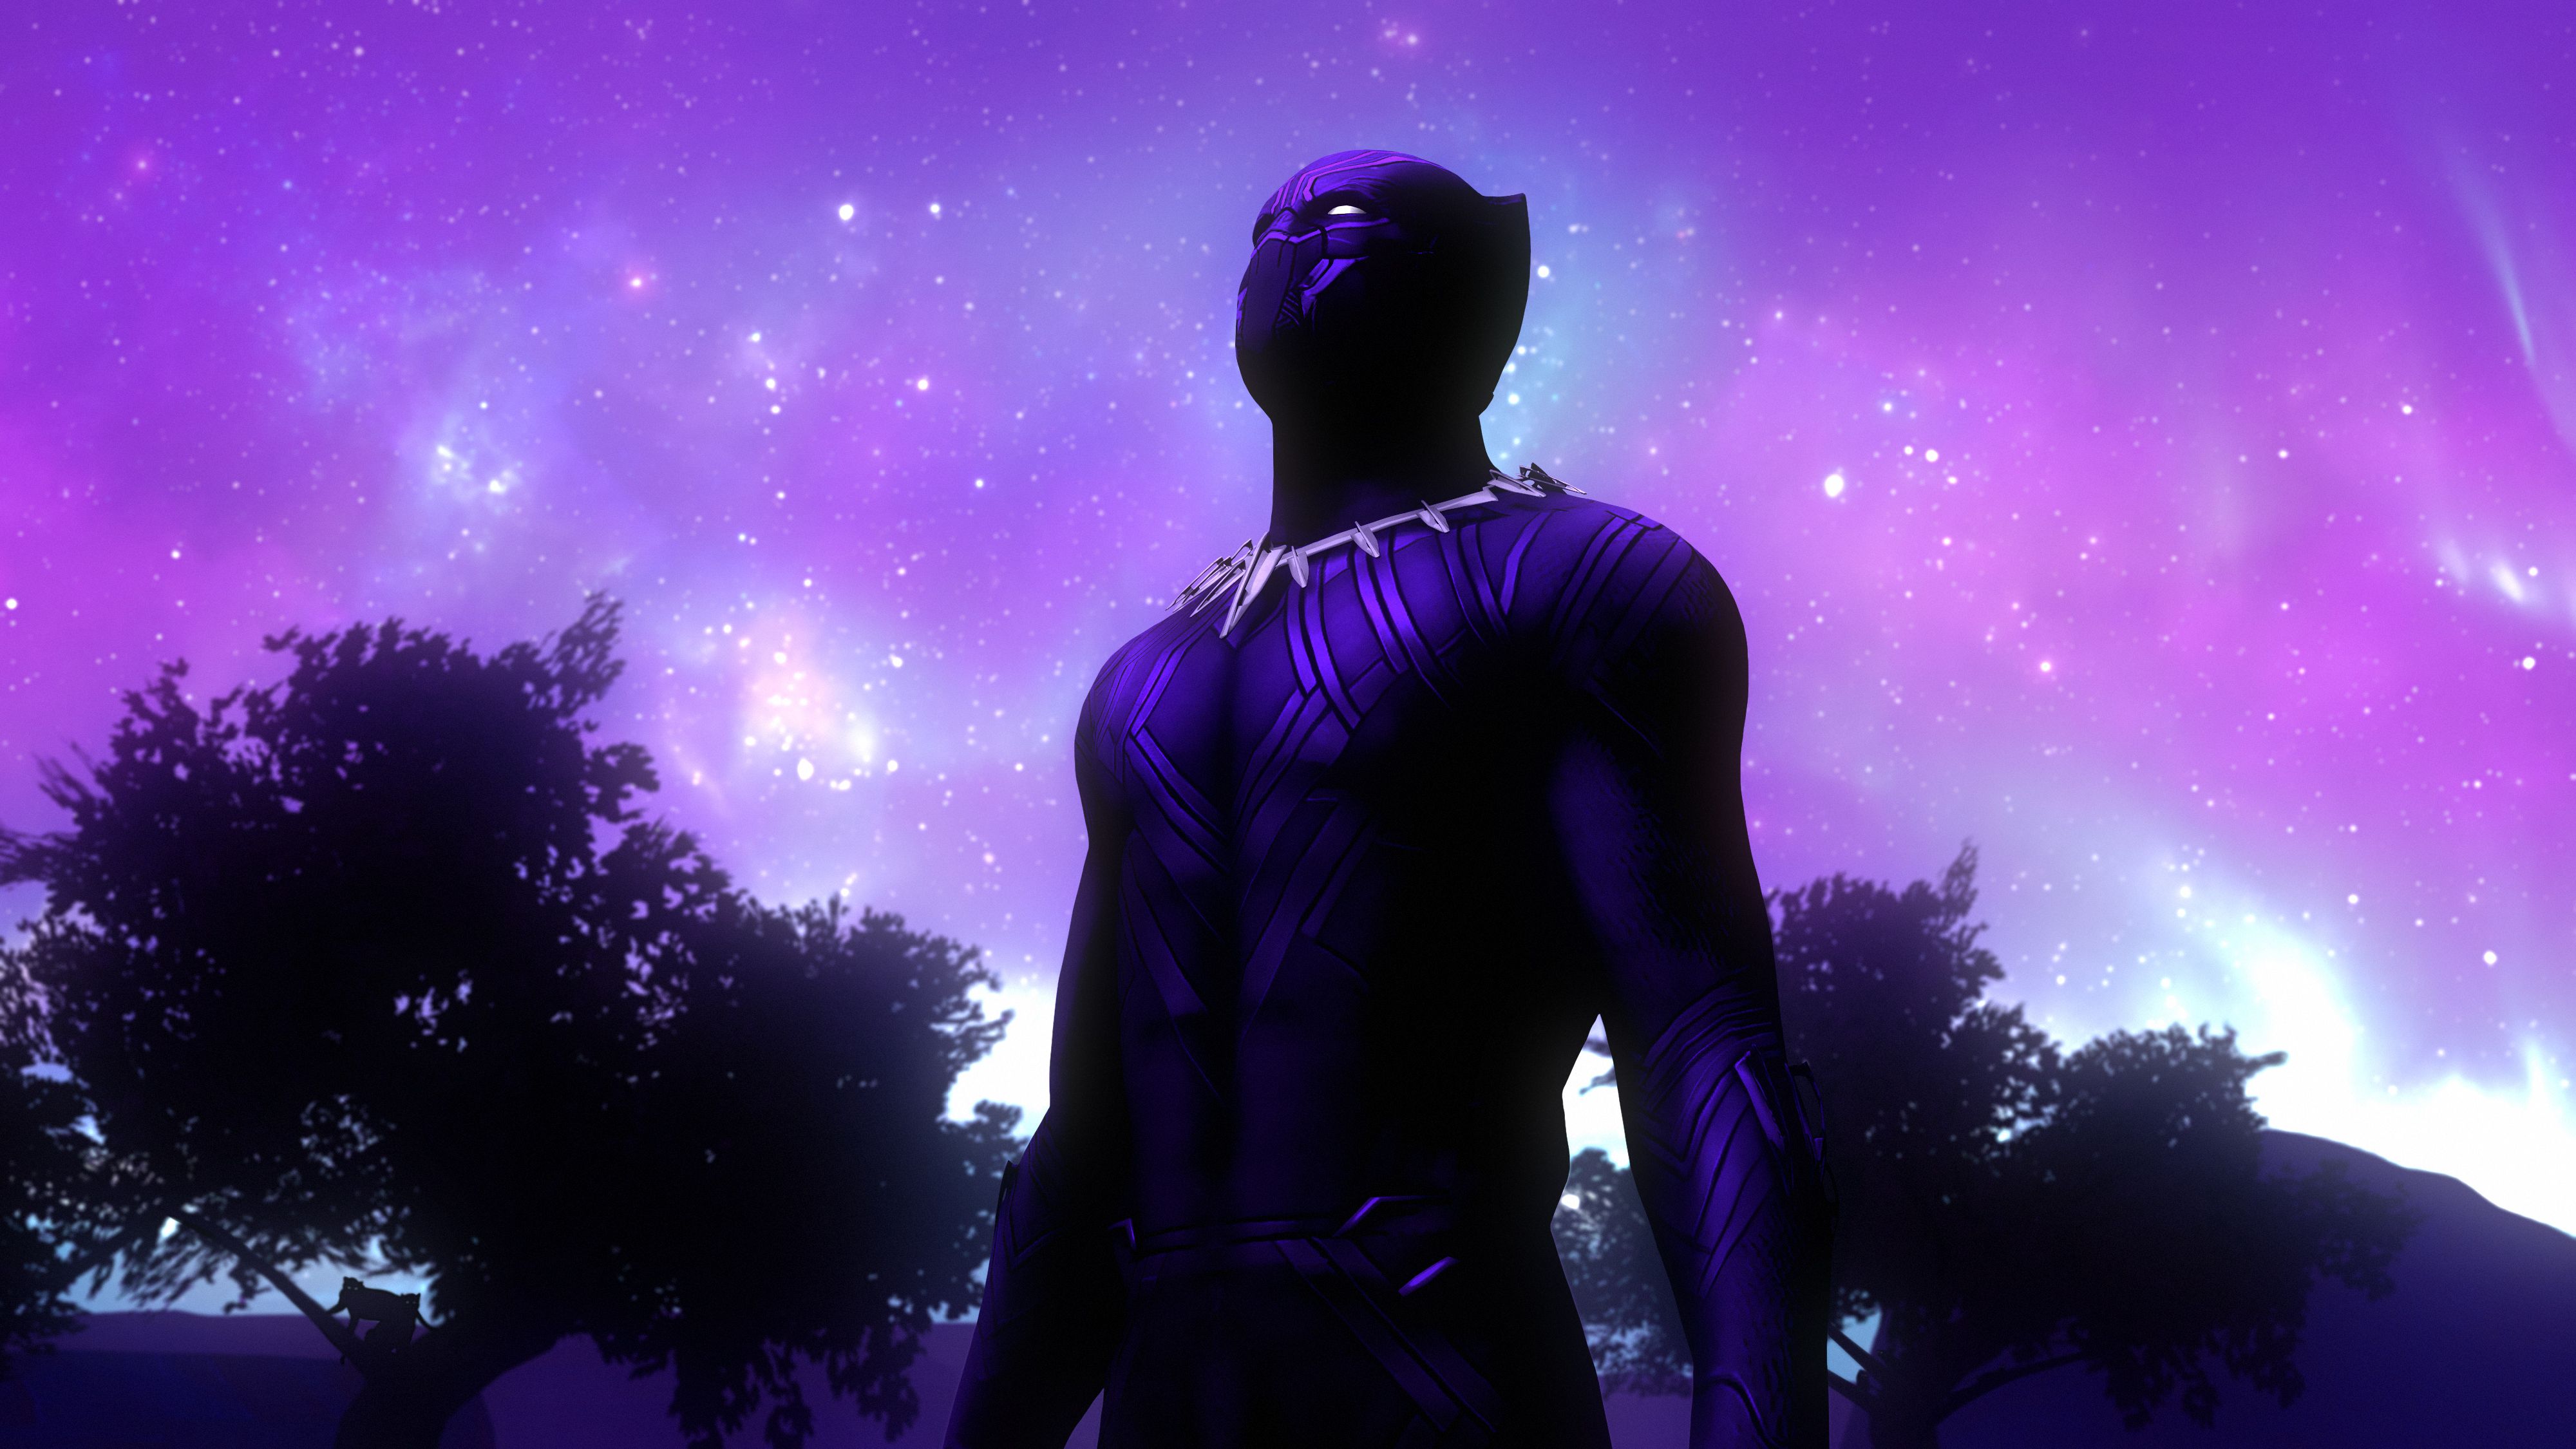 Wallpaper Black Panther, T'Challa, Marvel Comics, Purple sky, Purple suit, 4K, Creative Graphics,. Wallpaper for iPhone, Android, Mobile and Desktop